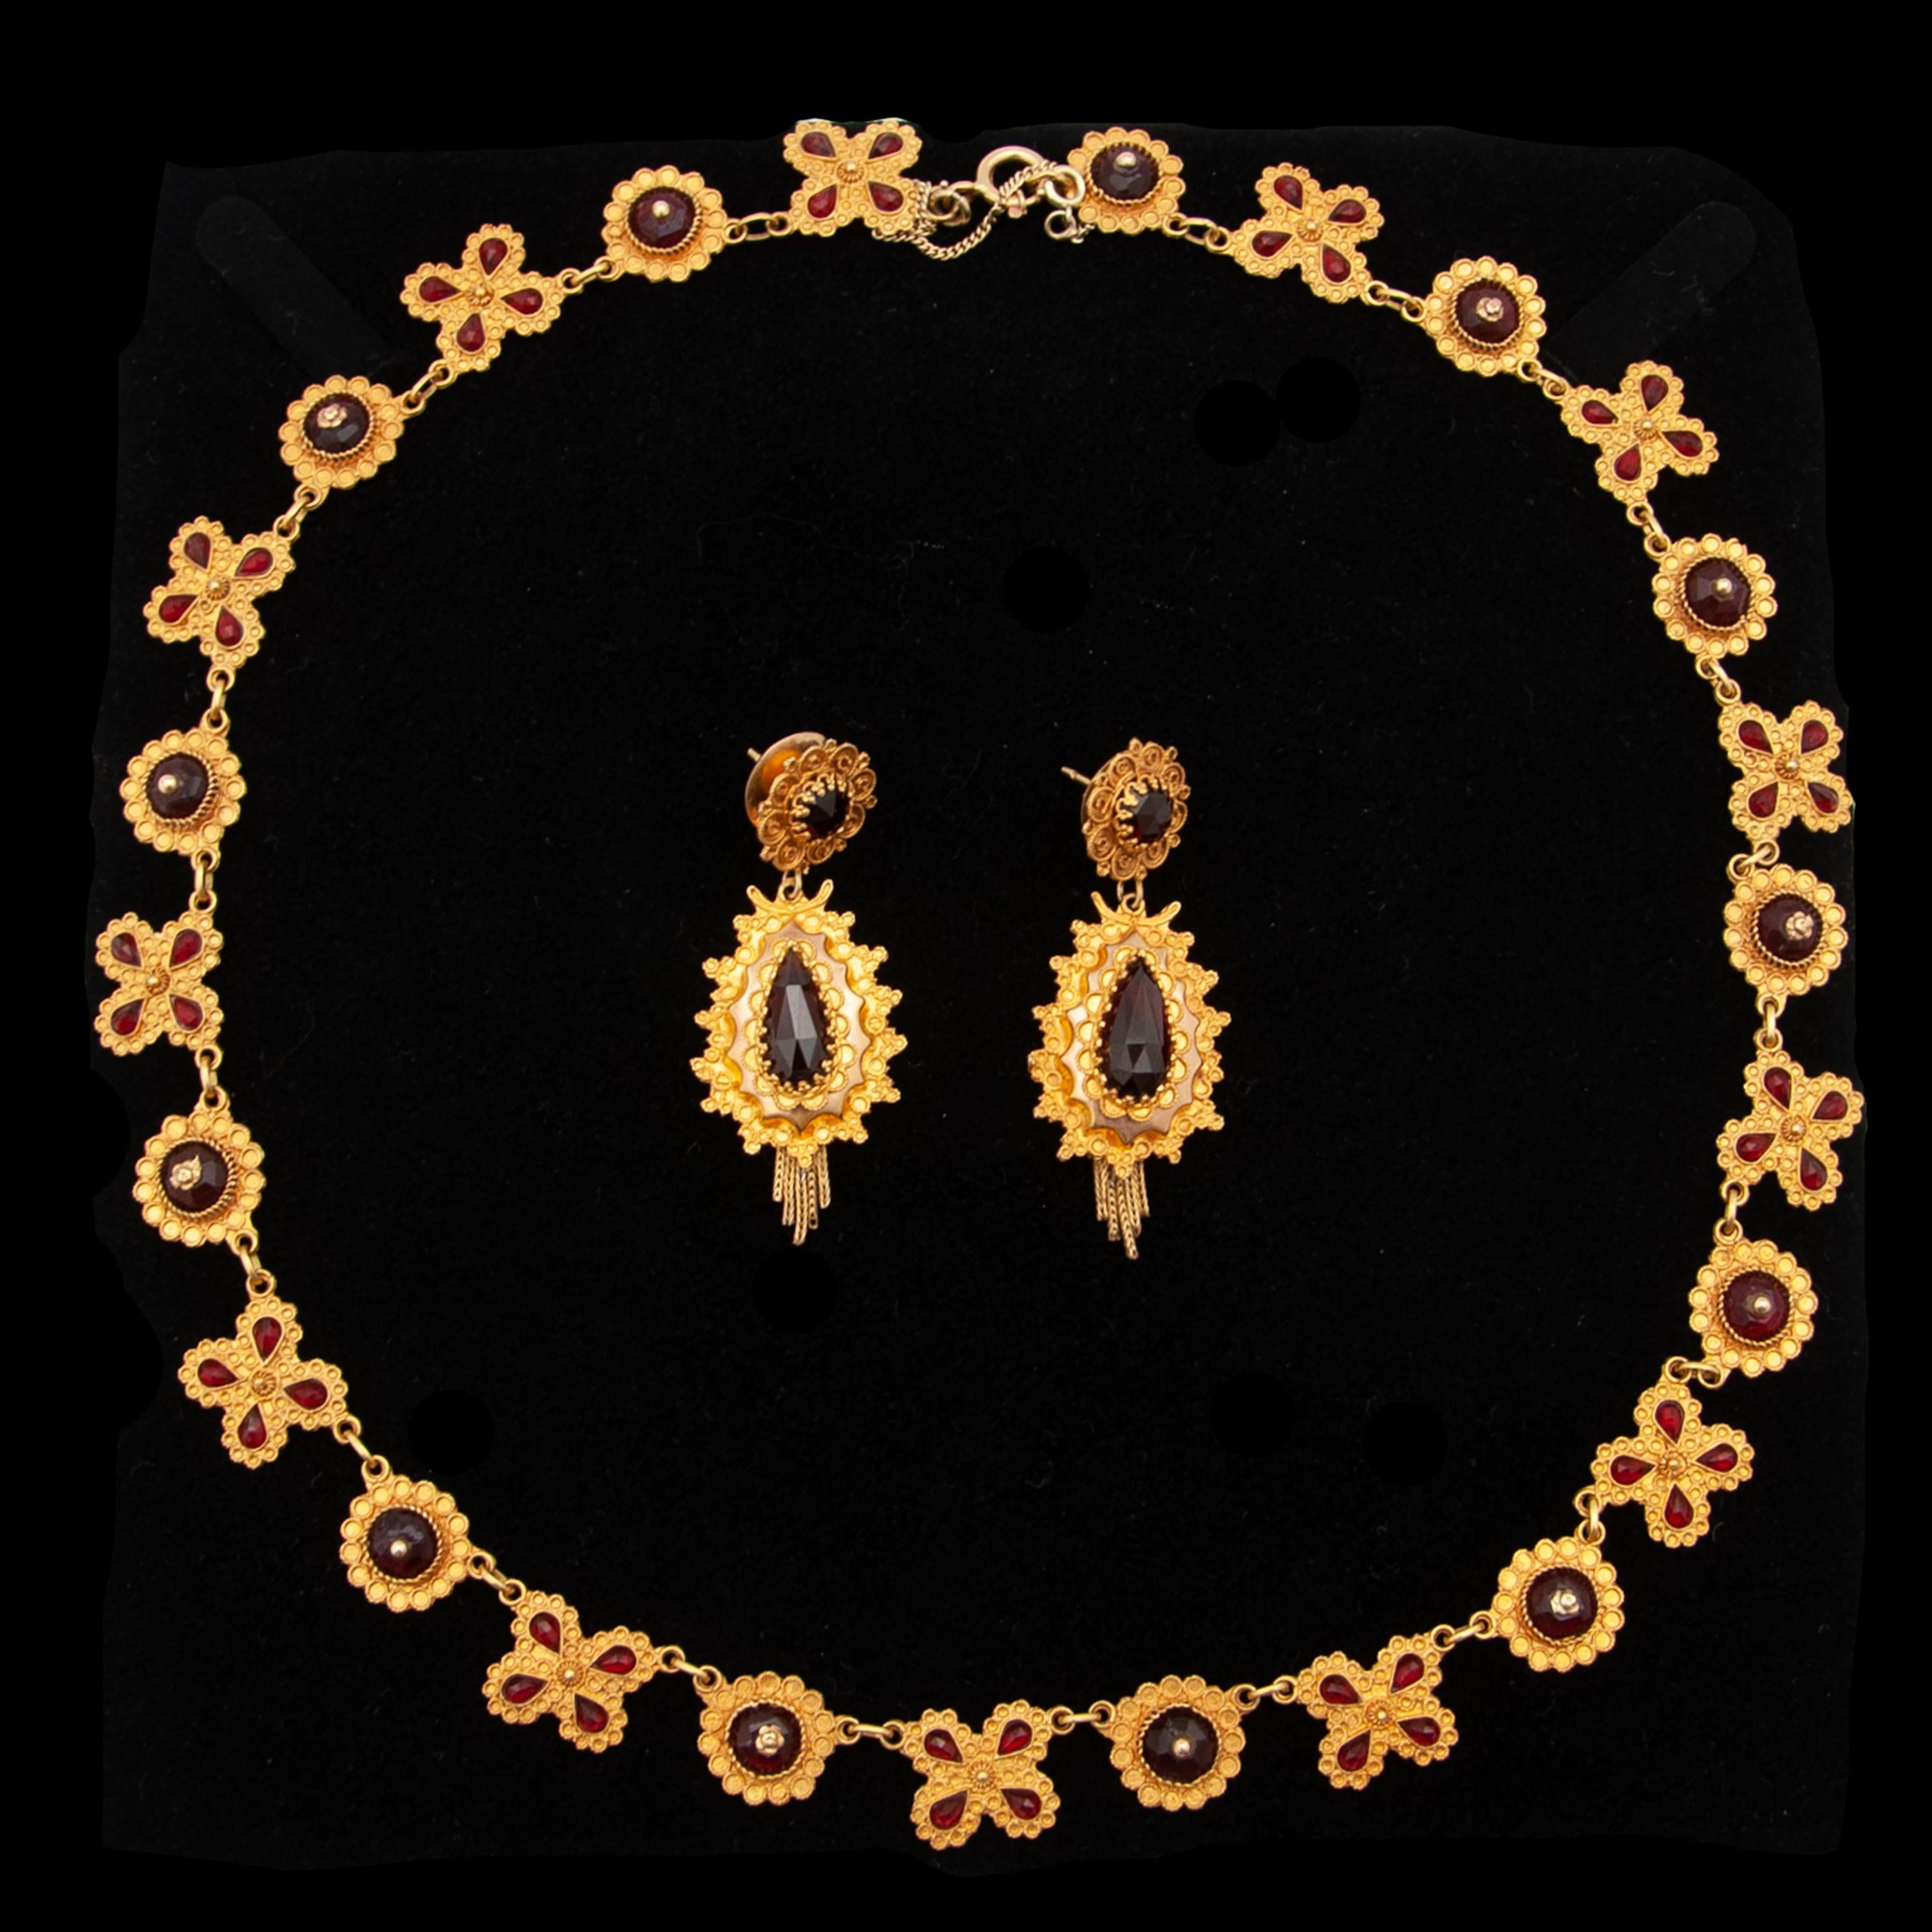 A magnificent antique 19th century gold jewelry set consisting of earrings and a necklace. The design of the necklace is stunning. The chain of the necklace alternates with a golden flower and a rosette. The flowers are inlaid with four drop-shaped